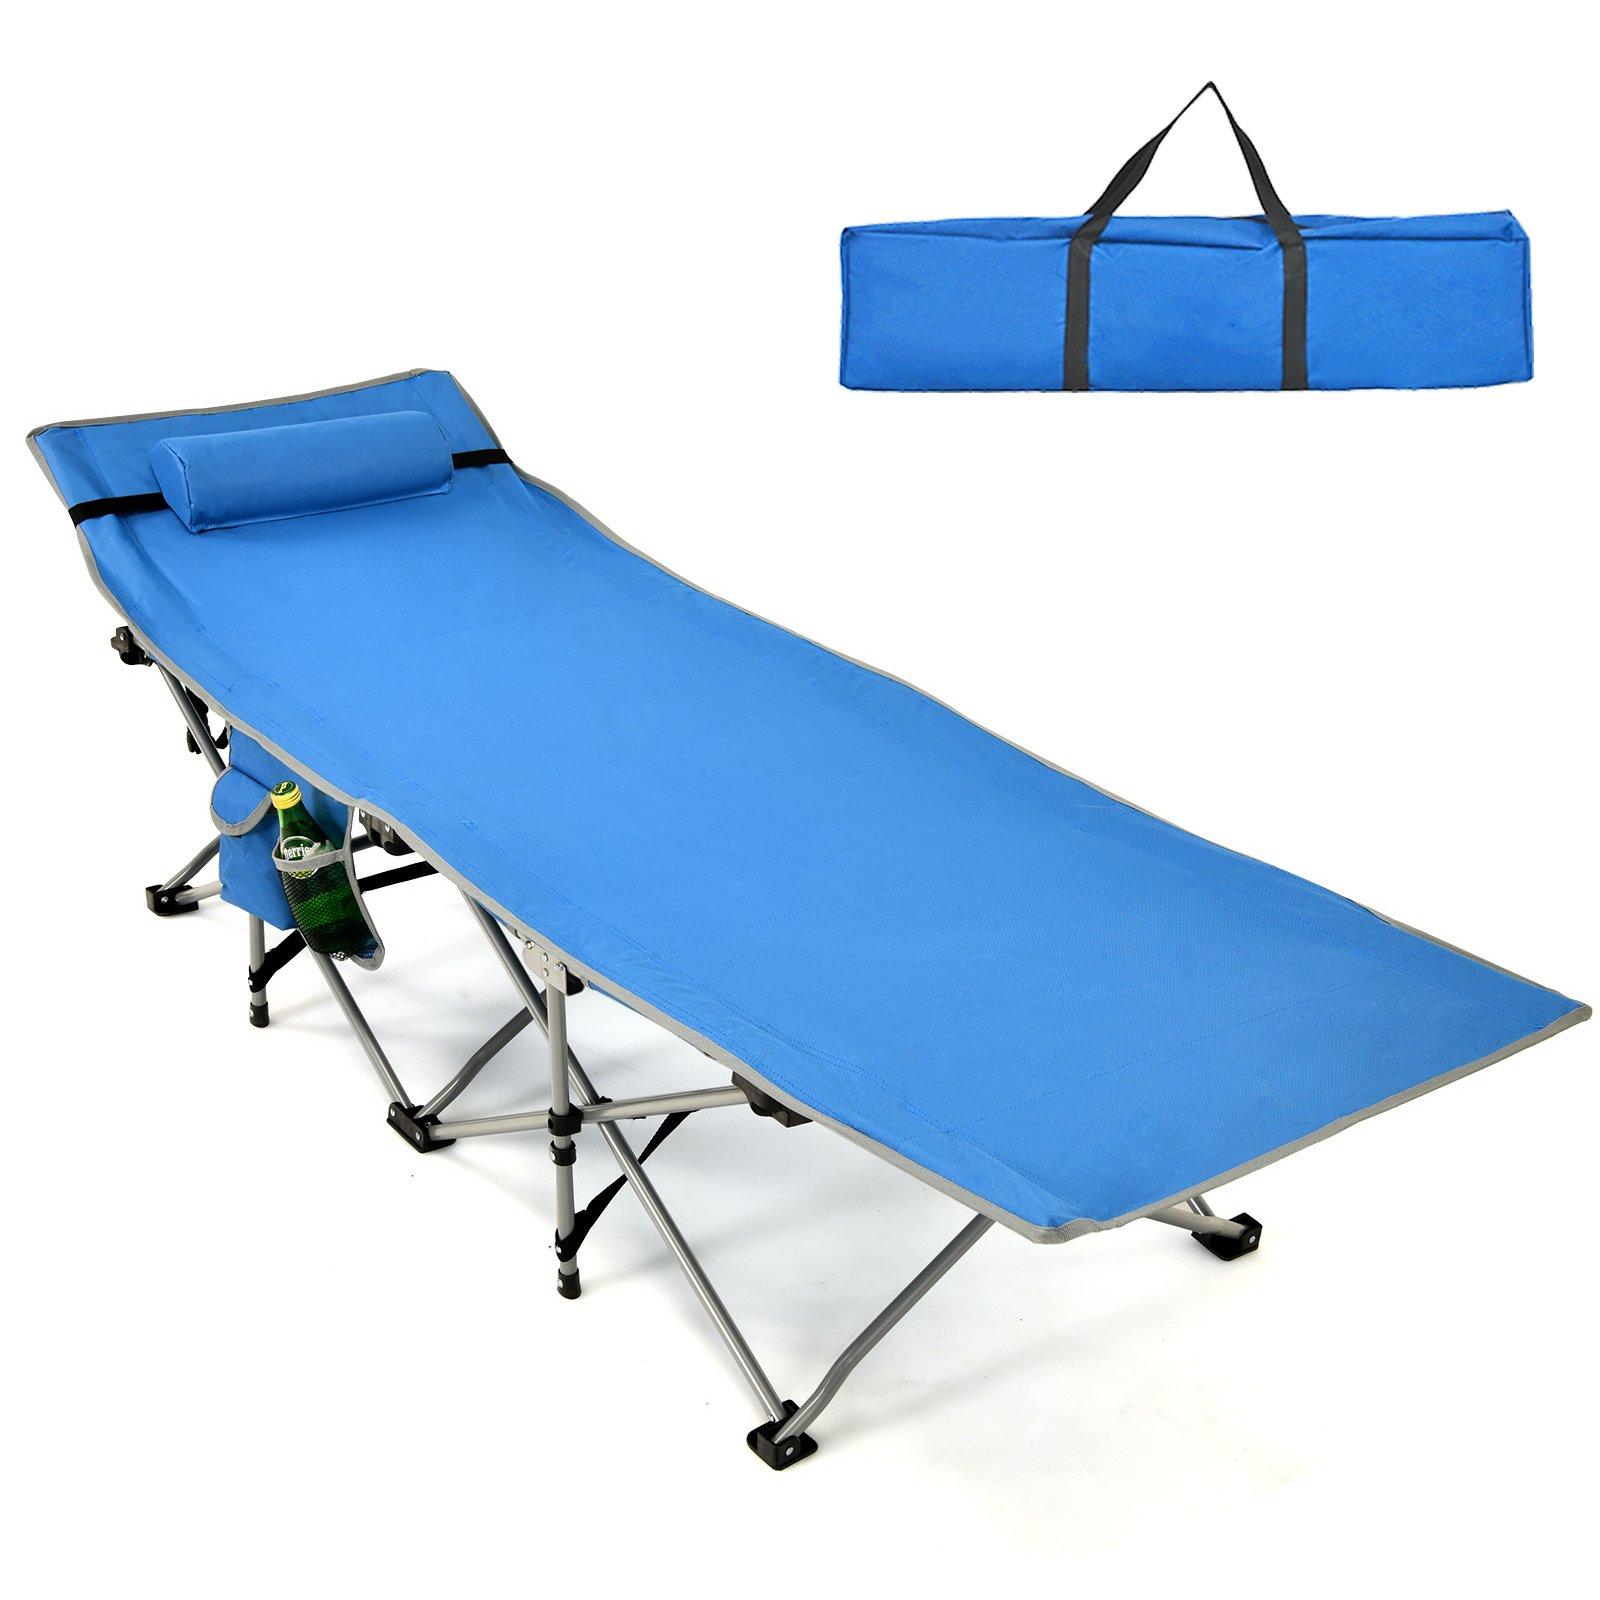 Folding Camping Cot Heavy-Duty Outdoor Cot Bed Portable Sleeping Cot